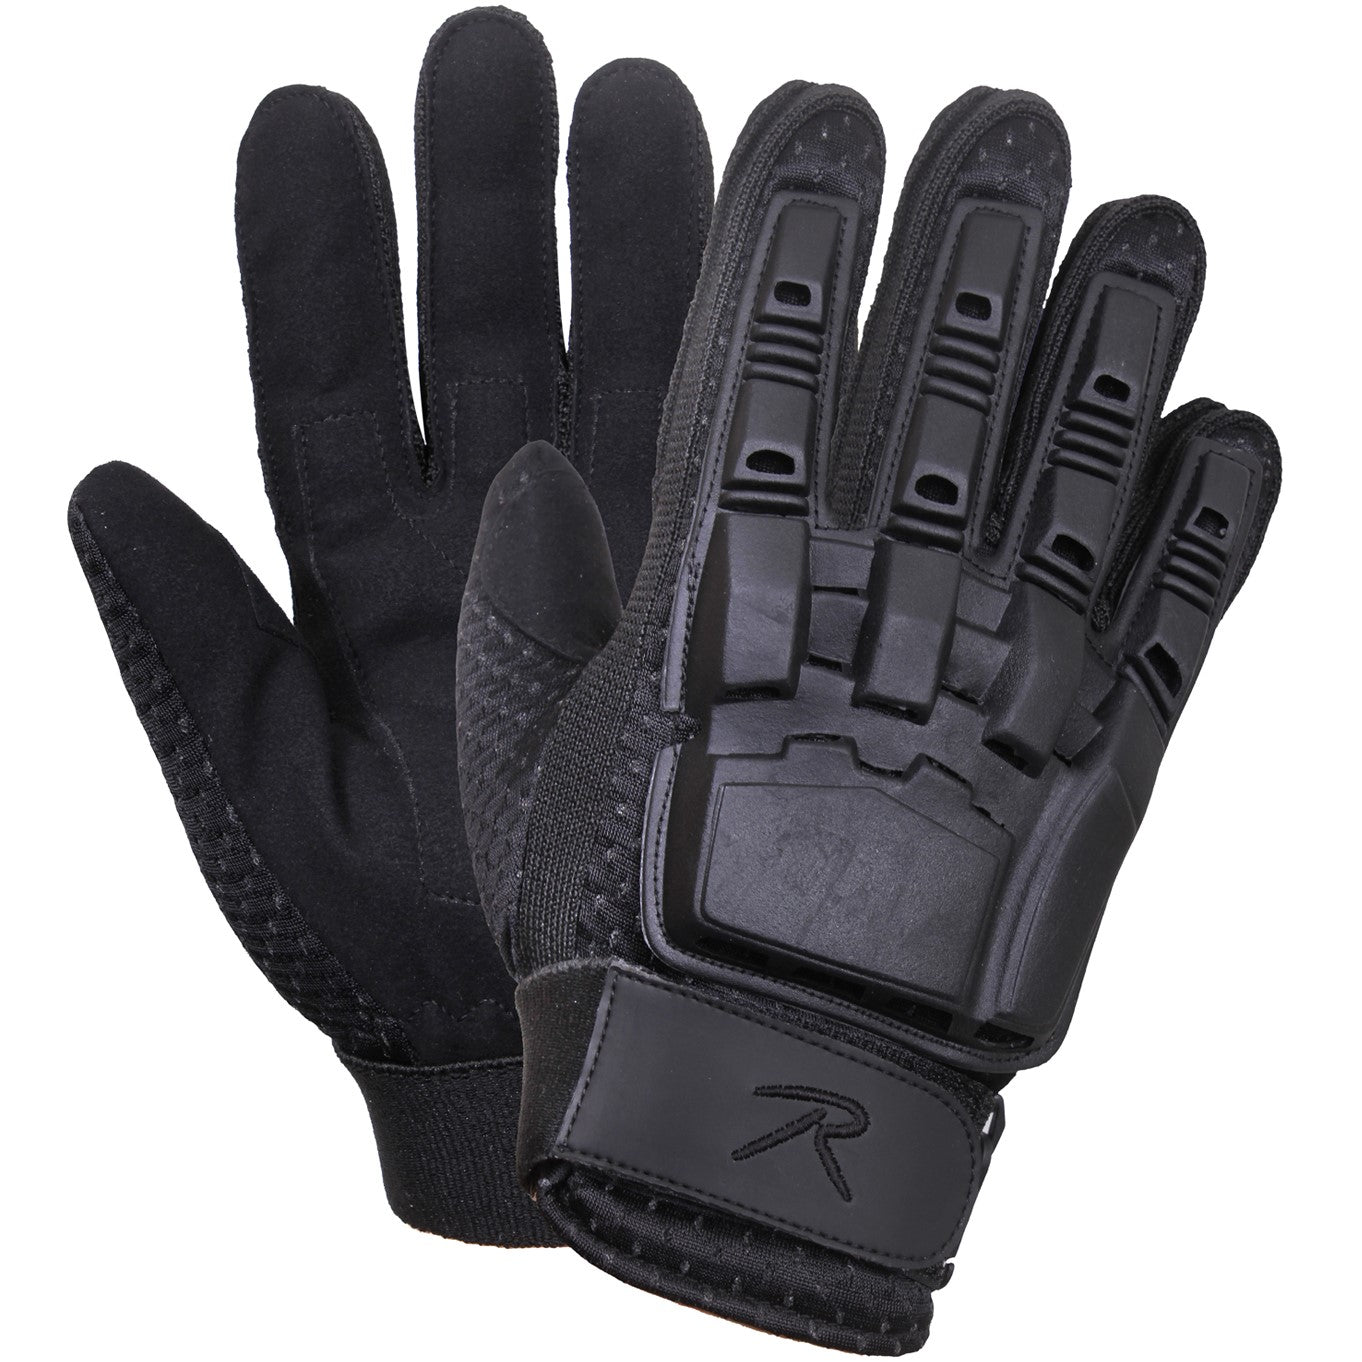 Rothco Armored Hard Rubber Back Tactical Gloves S-XL